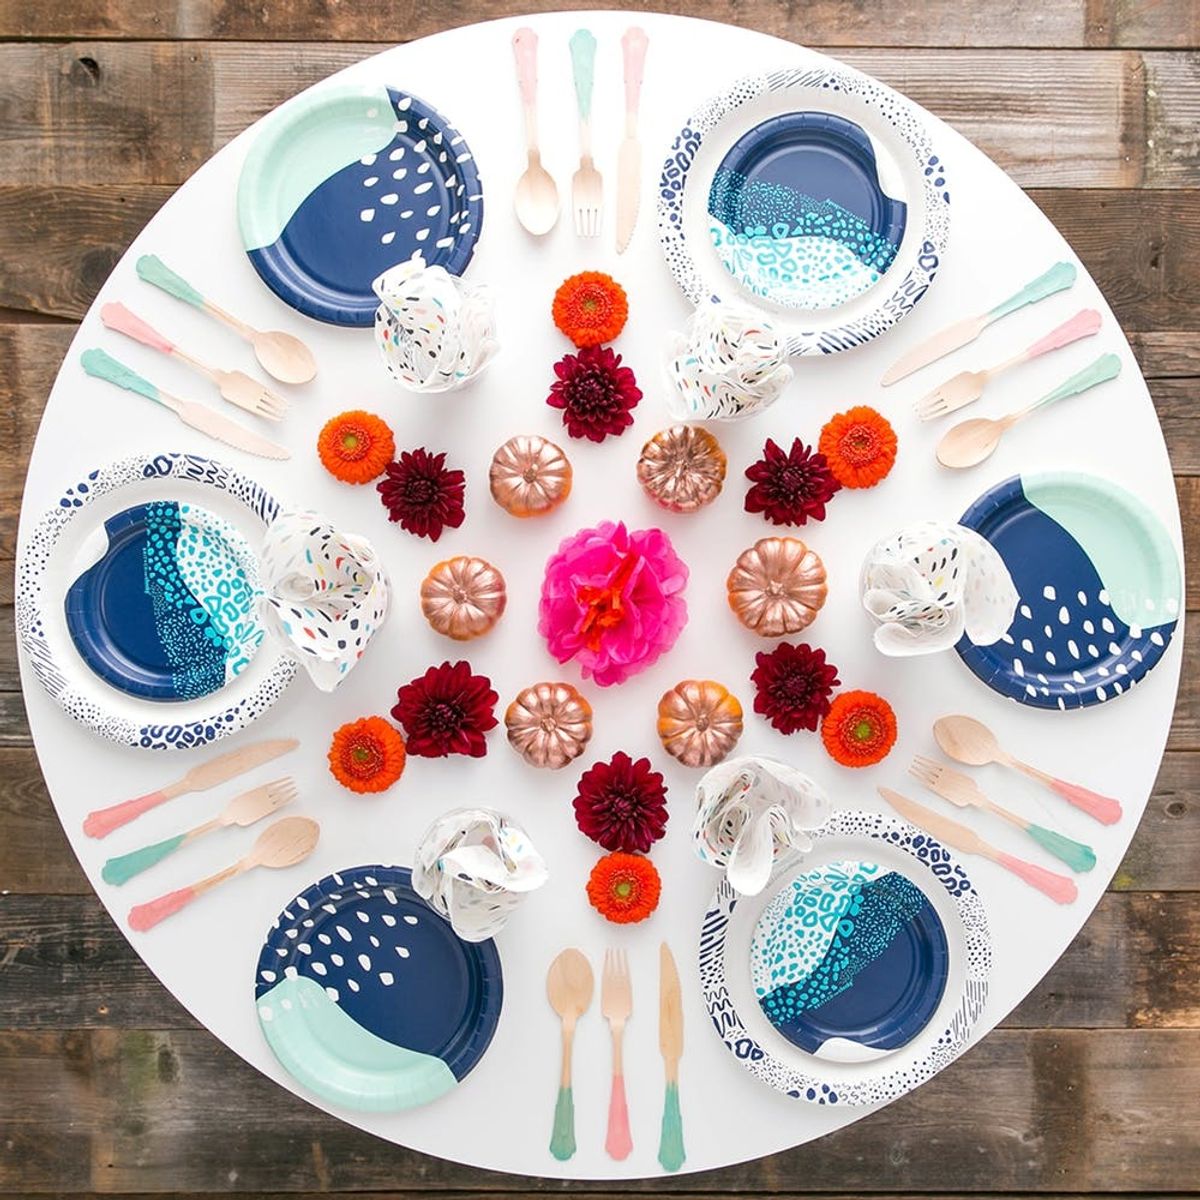 3 Hacks For Hosting a Fall Dinner Party On a Budget